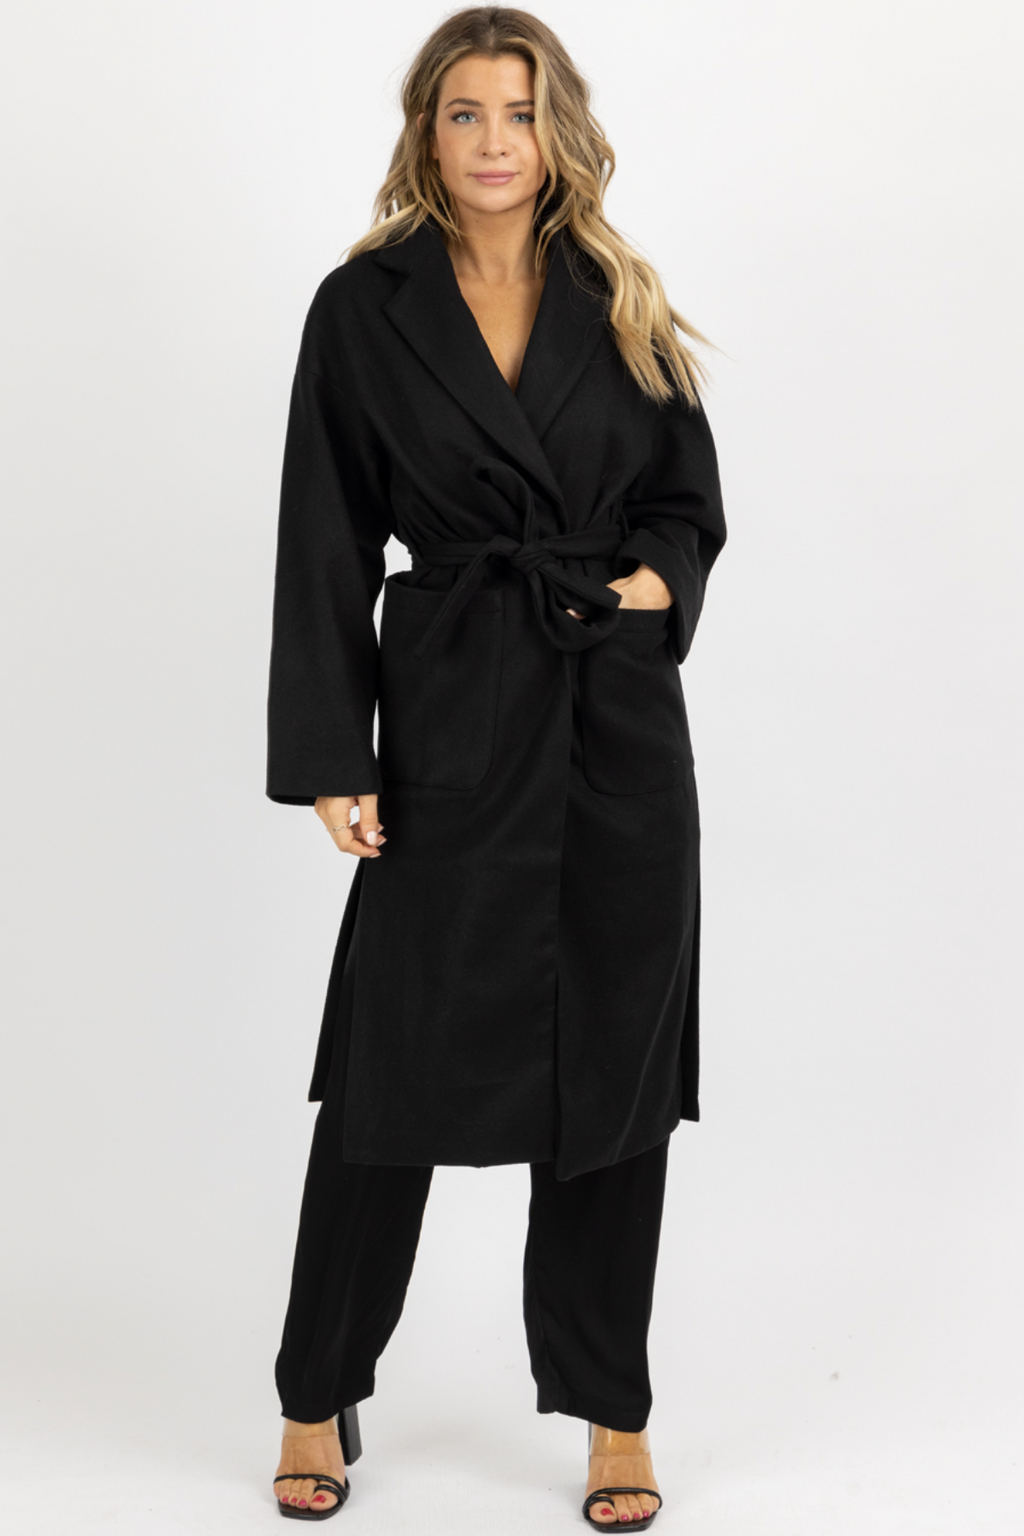 BLACK OVERSIZE BELTED TRENCH COAT